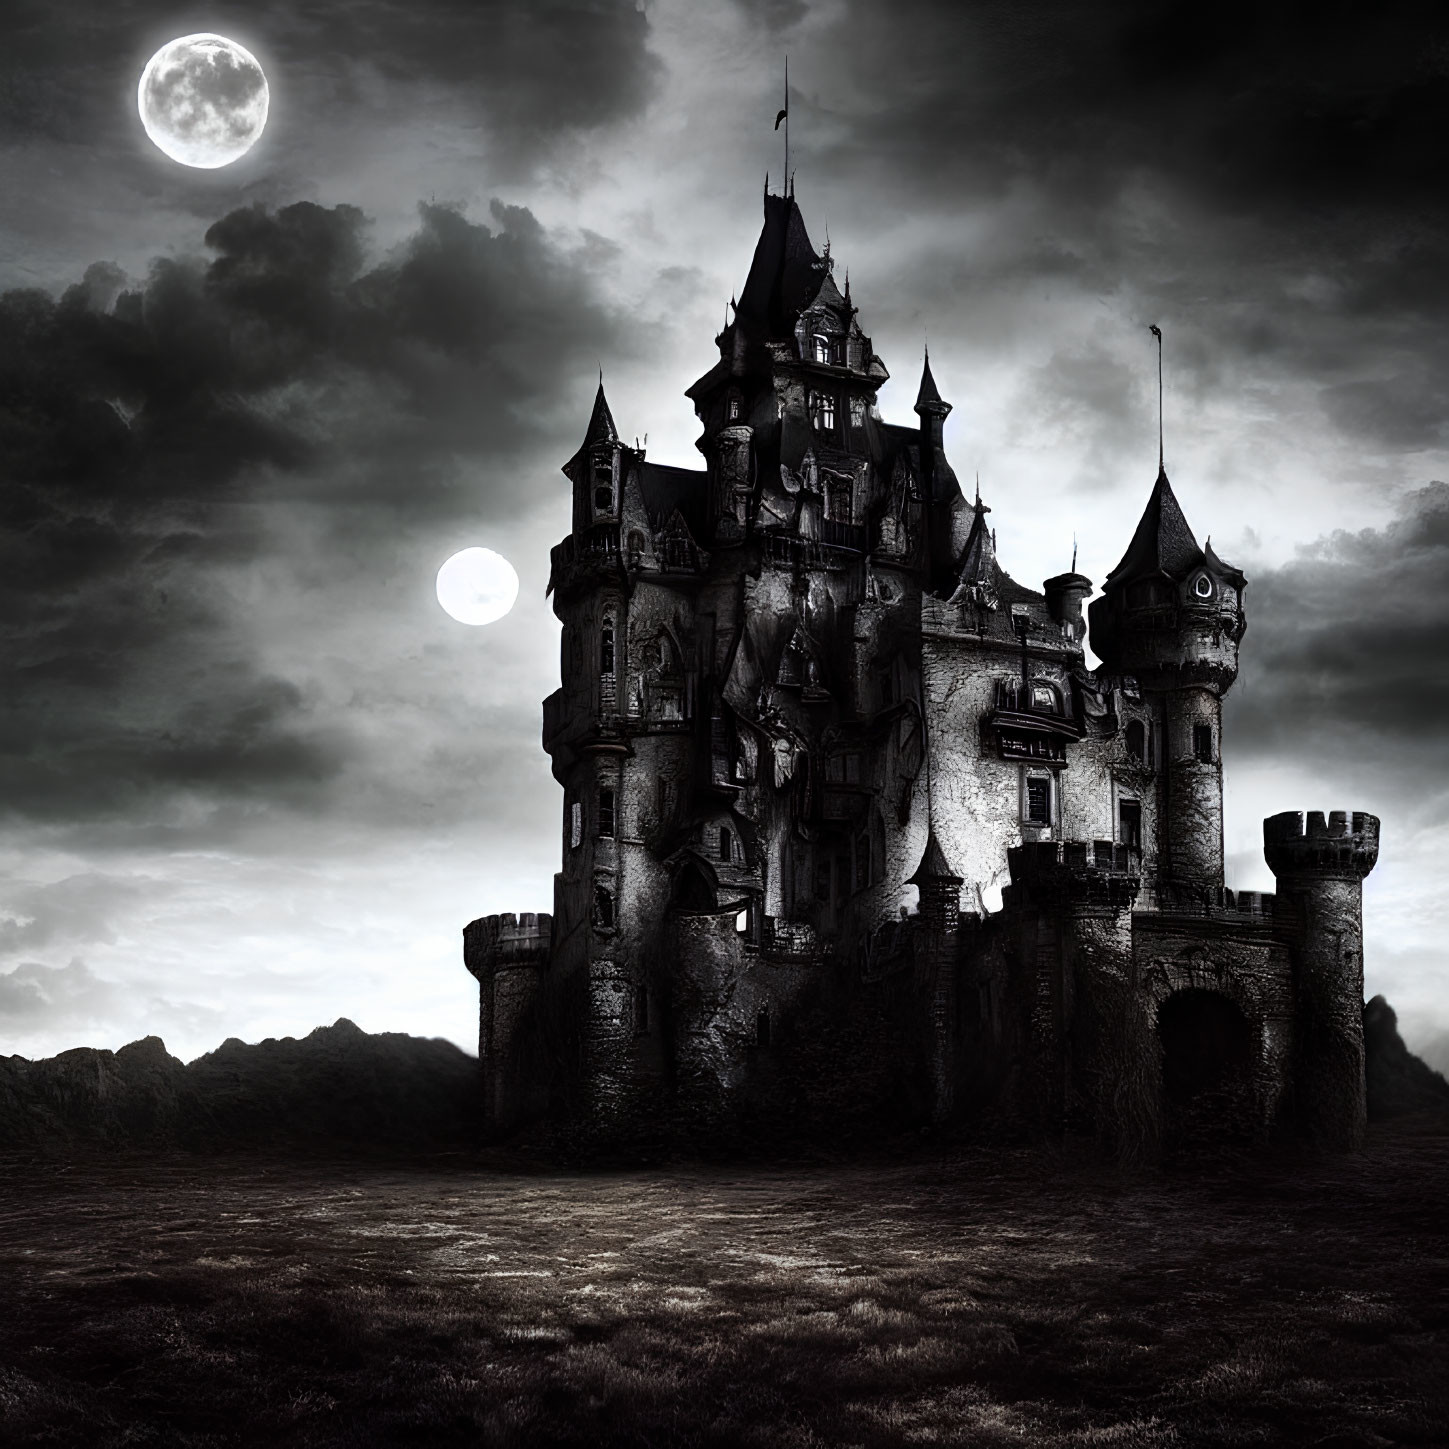 Gothic castle under night sky with two moons on rocky terrain